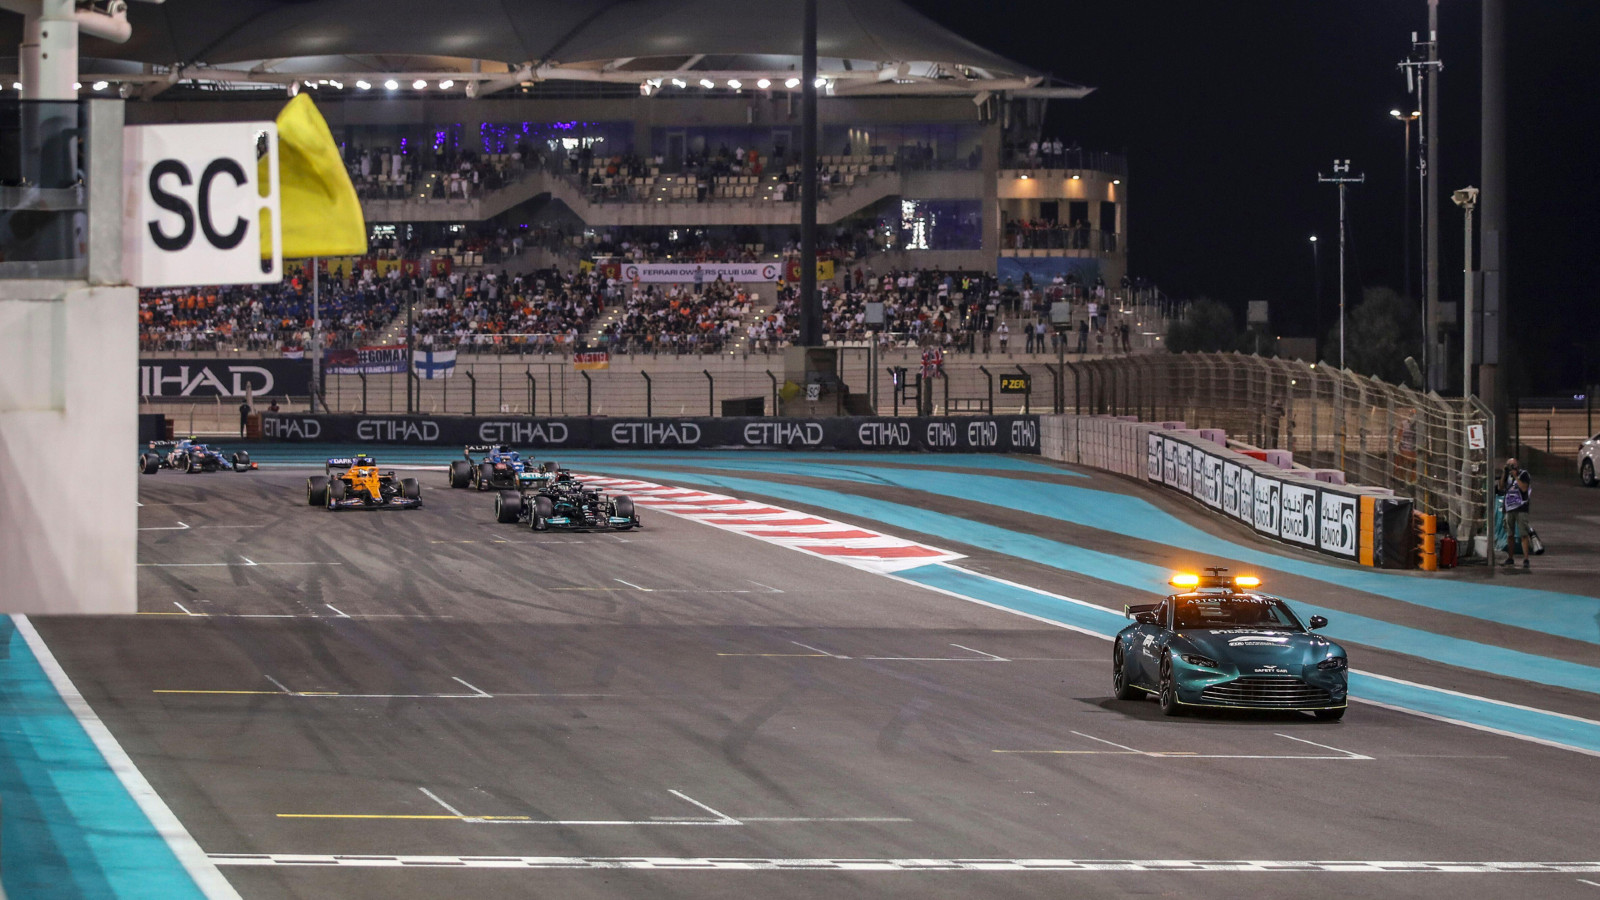 The Safety Car leads the pack at the 2021 Abu Dhabi Grand Prix. Yas Marina, December 2021.